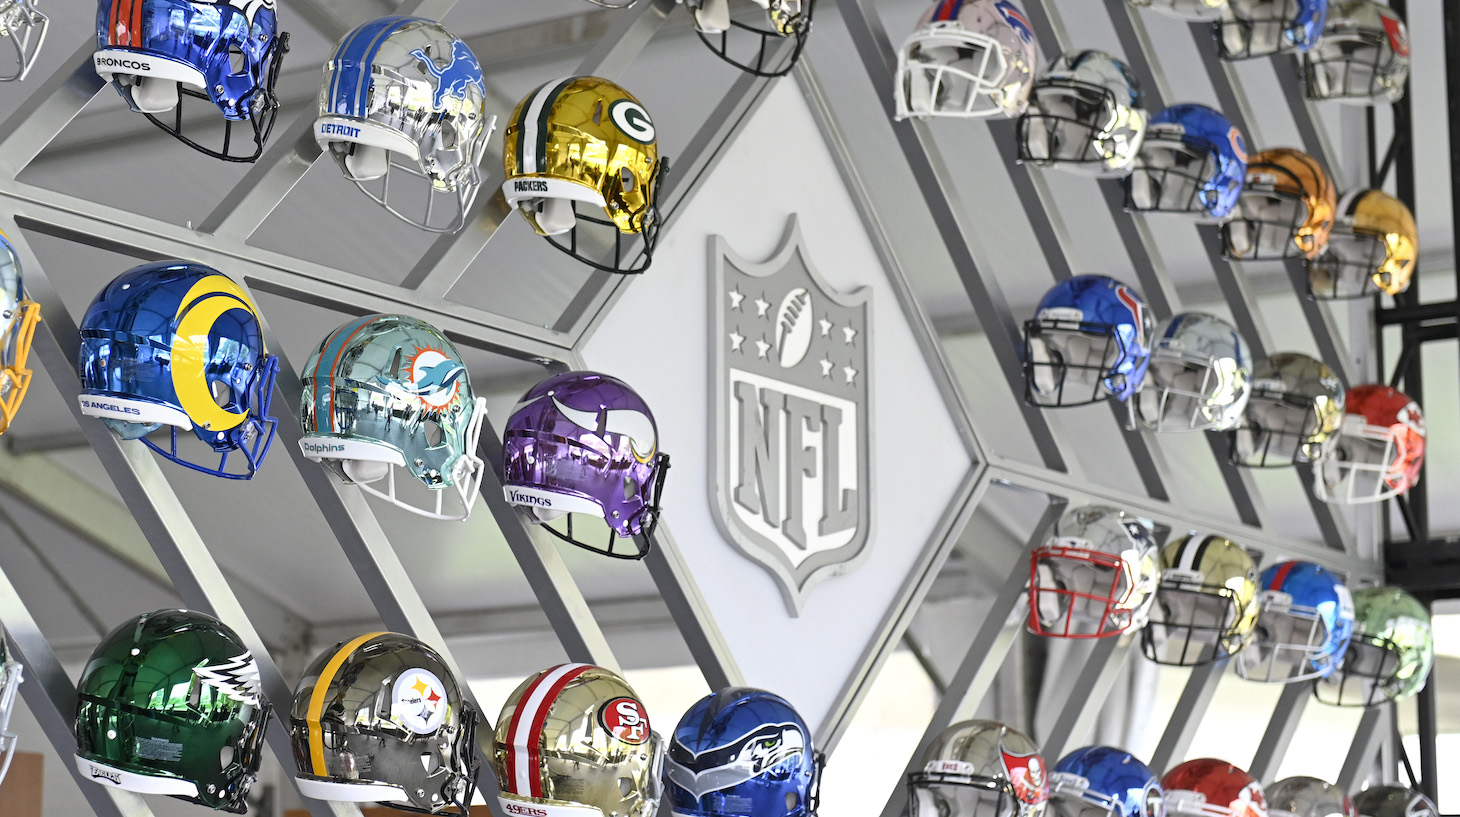 CLEVELAND, OHIO - APRIL 28: Wall of NFL team helmets on display inside the NFL Locker Room at the NFL Draft Experience on April 28, 2021 in Cleveland, Ohio. (Photo by Duane Prokop/Getty Images)